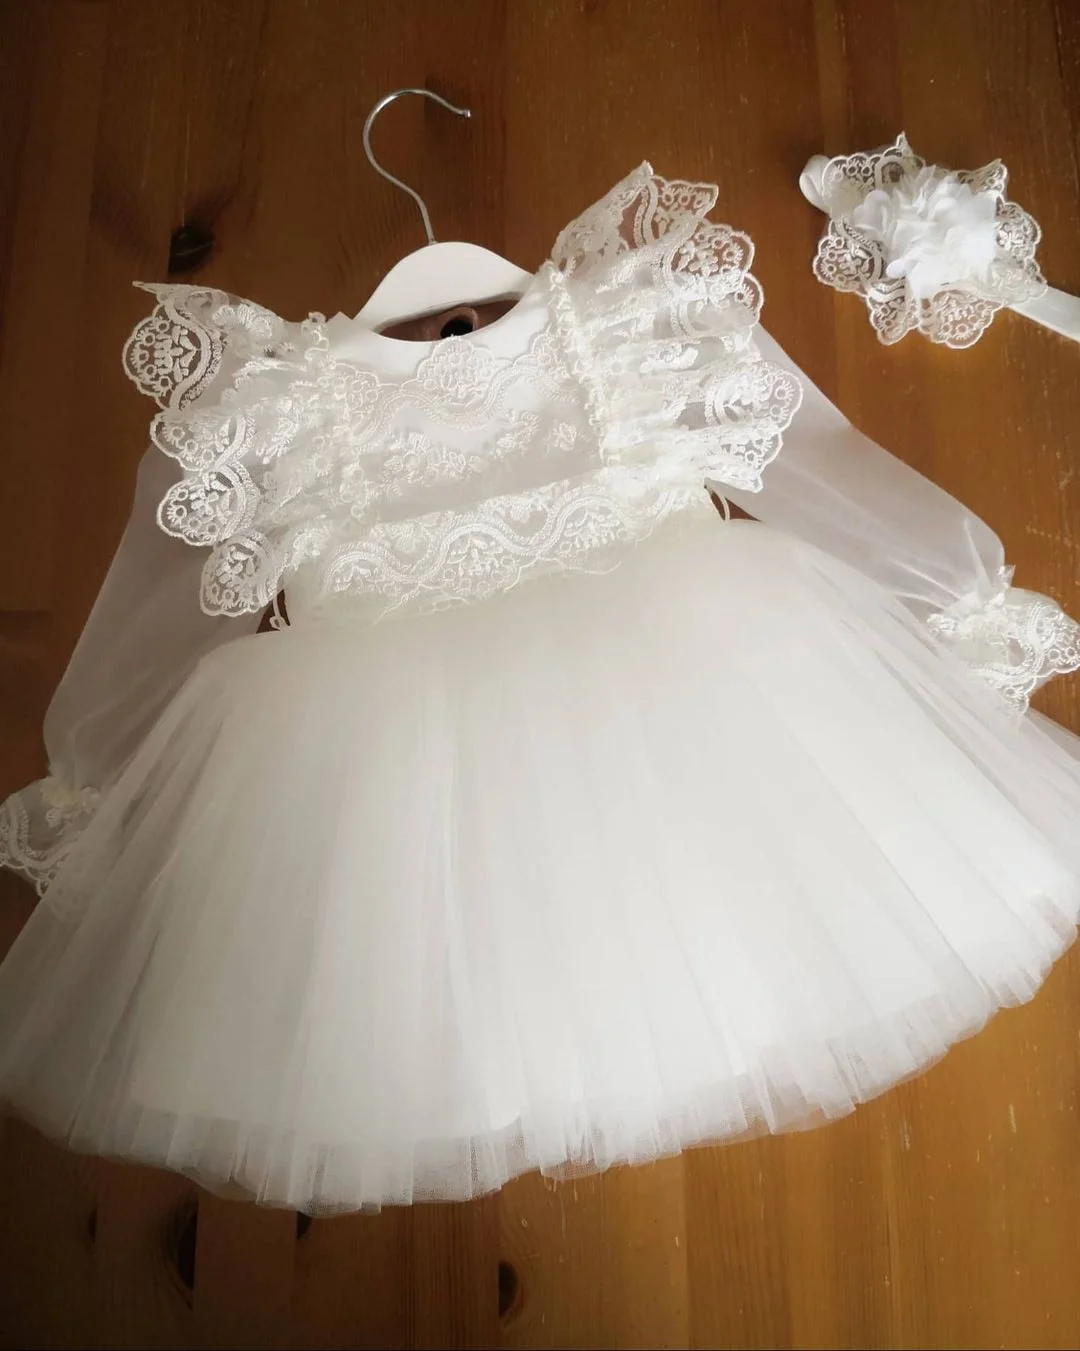 White Lace Toddler Girl Baby Clothing Dresses Infant 1 Year Birthday Christening Girls Tulle Dress Kids Party Cake Smash Outfit